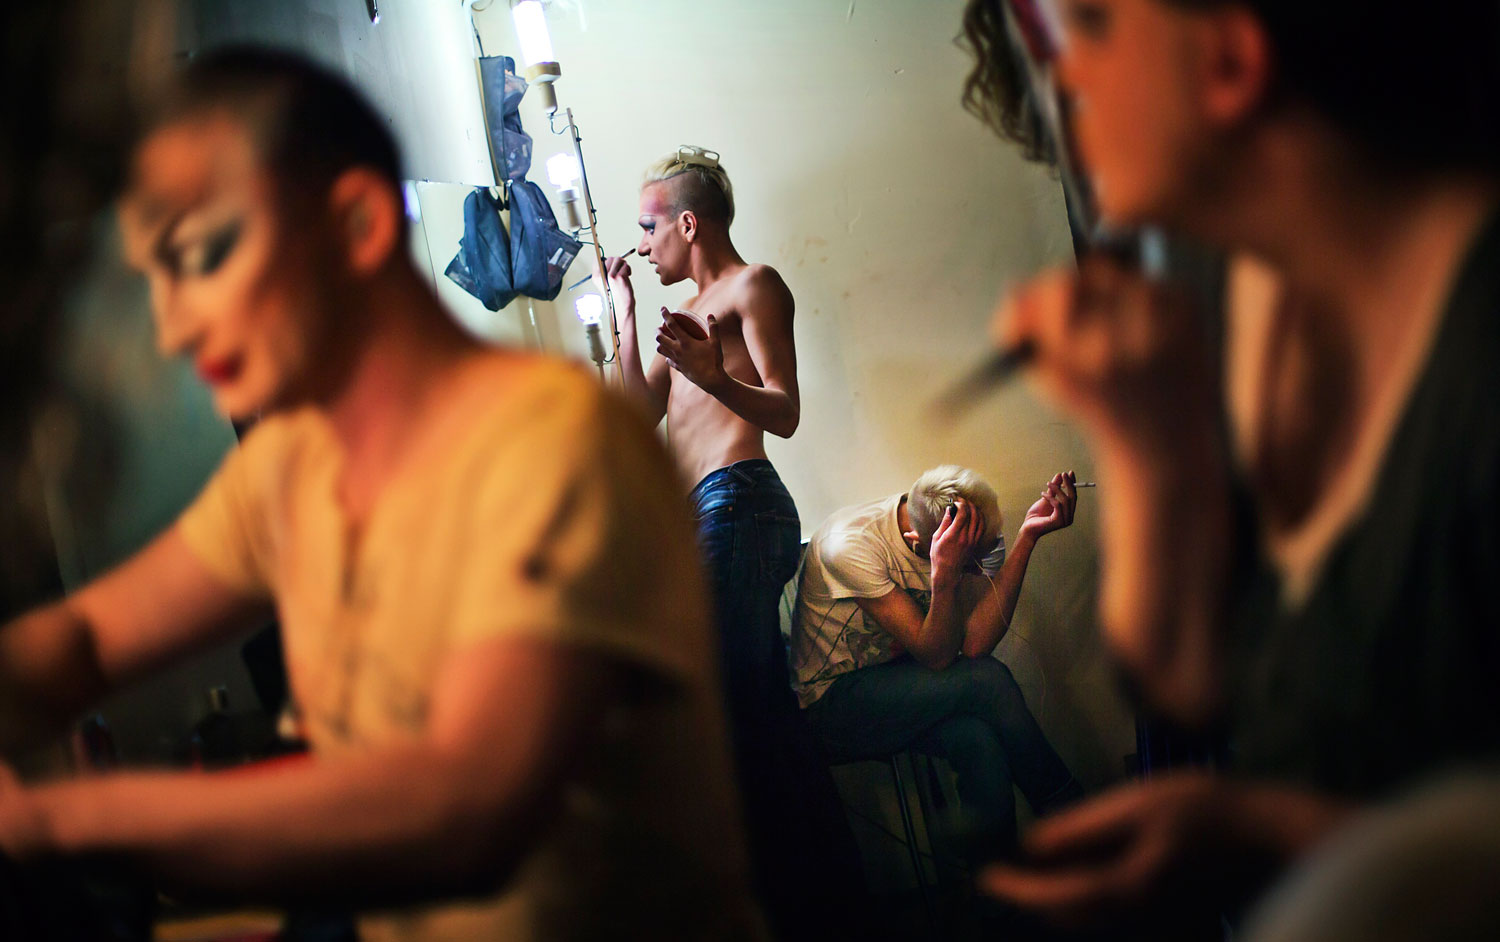 Performers get ready backstage before a performance at the Mayak cabaret, the most reputable gay club in Sochi,  Feb. 8, 2014.